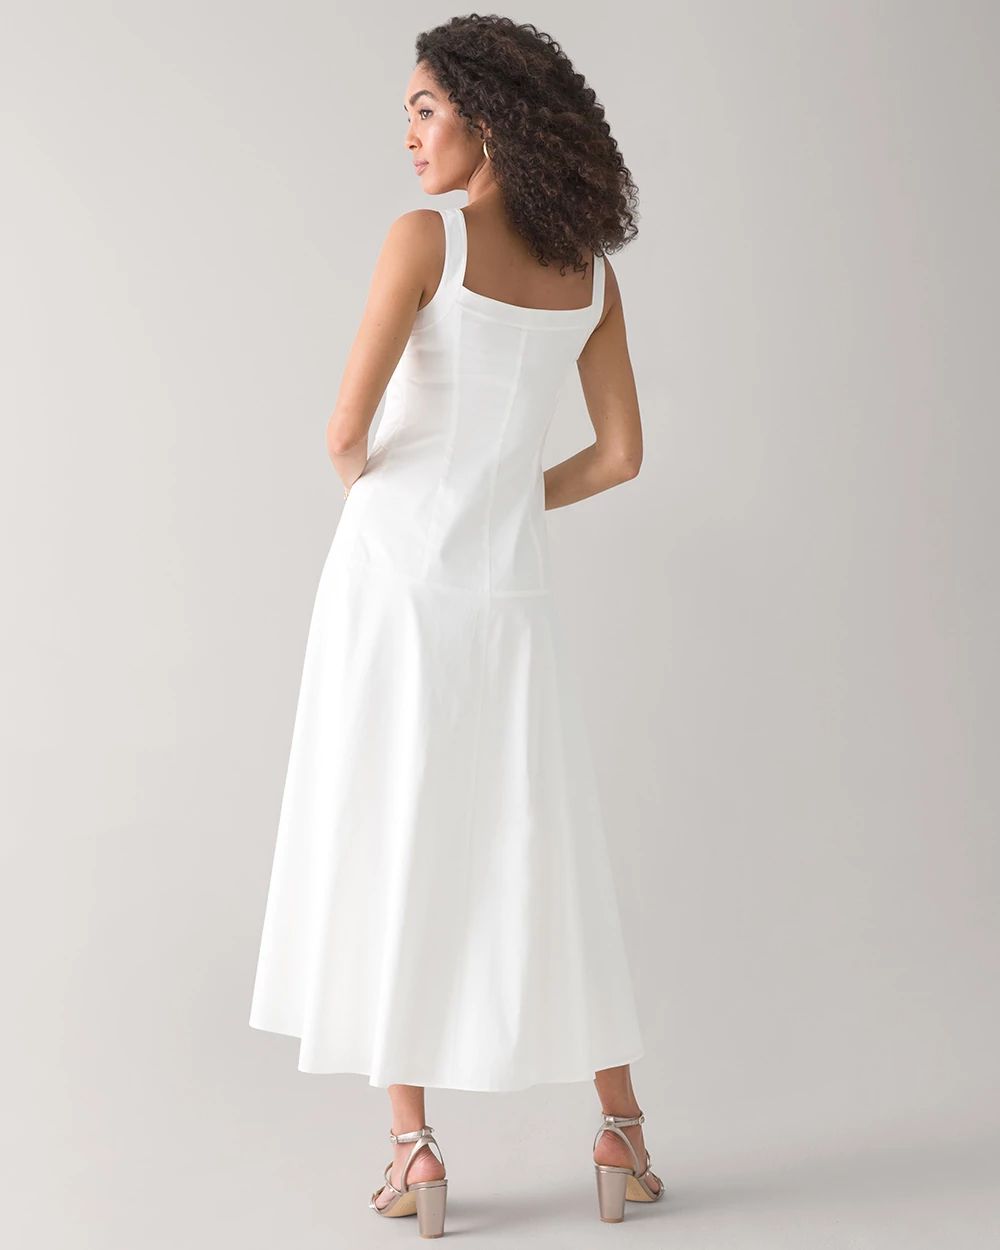 White Midi Sundress click to view larger image.